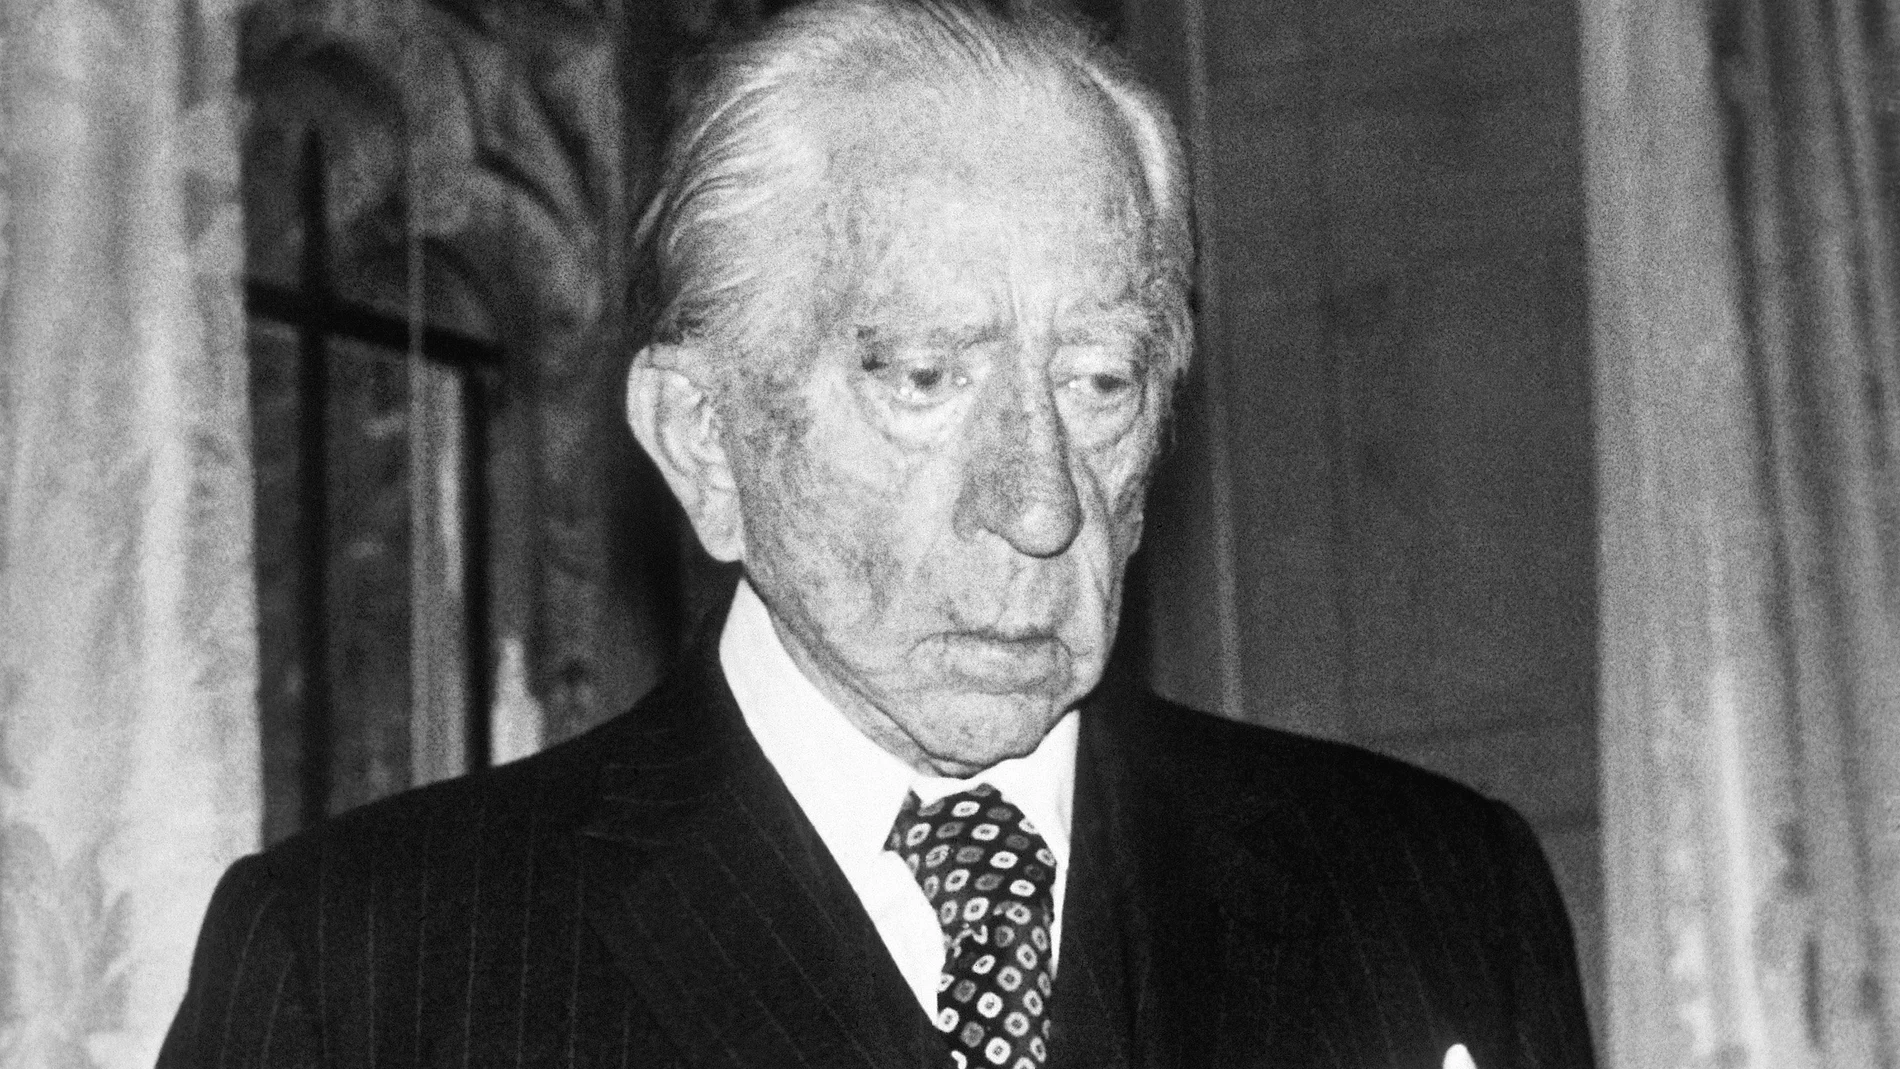 FILE - This 1975 file photo shows oil billionaire, Jean Paul Getty, America's richest expatriate, at his home at Guildford, Surrey, England. A man has been found dead at the Hollywood Hills home of Andrew Getty, grandson of the late J. Paul Getty and heir to the Getty oil fortune - but they havenít confirmed that it is Getty. Los Angeles police Officer Jack Richter says officers went to the home shortly after 2:15 p.m. Tuesday, March 31, 2015, after a woman called to say someone in the house had died. (AP Photo/David Caulkin, File)